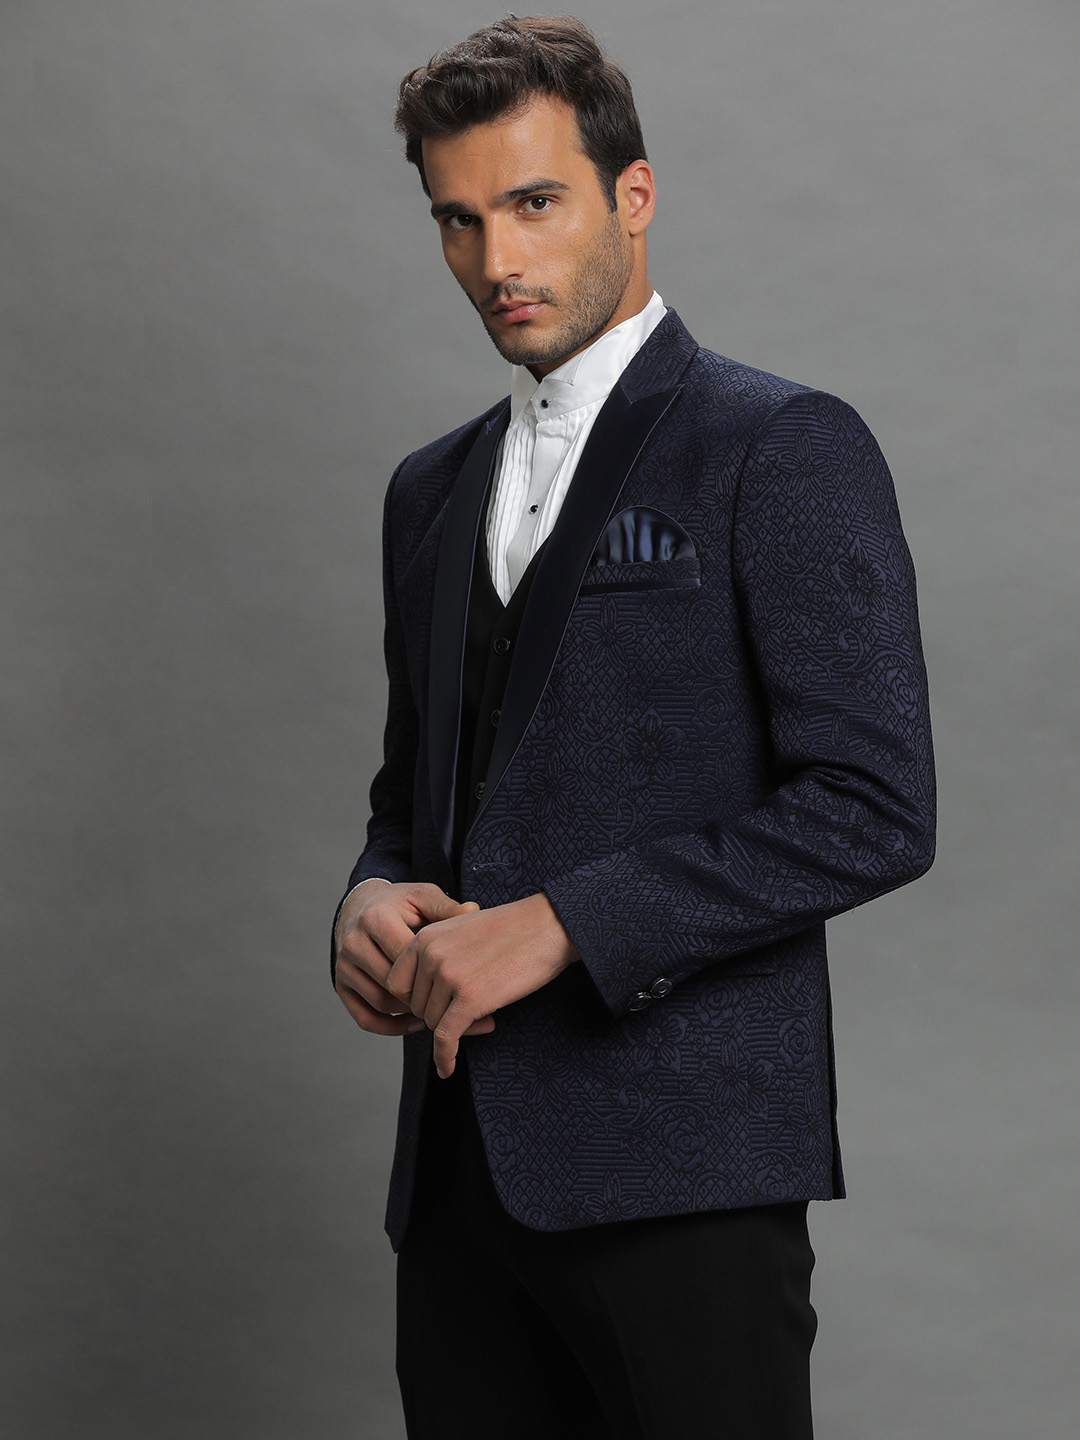 Navy Blue Embroidered 3 Piece Suit